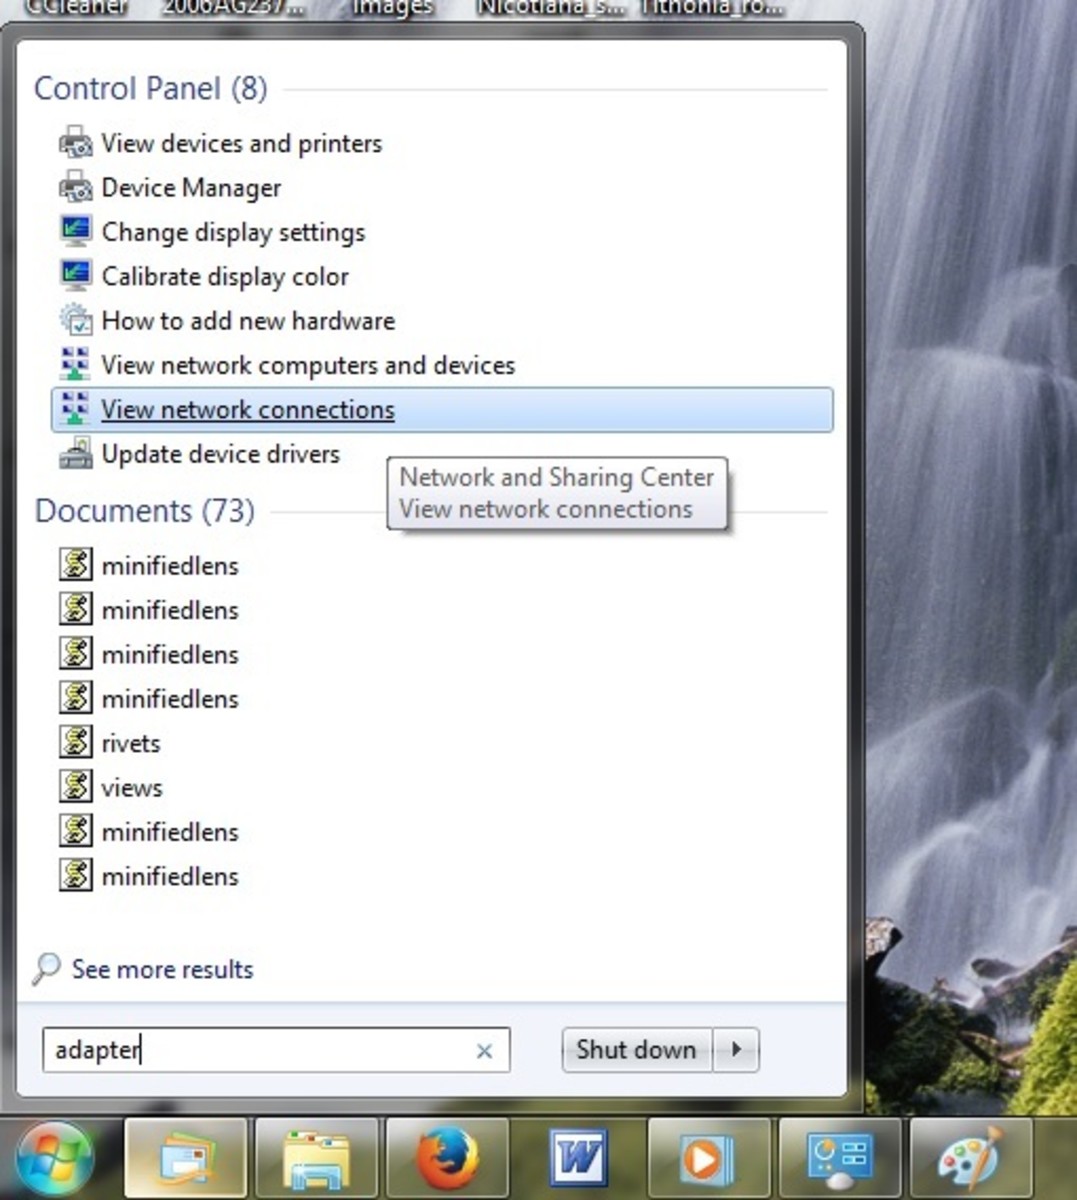 On XP, access network connections from the control. You can also use this method on Windows 7.